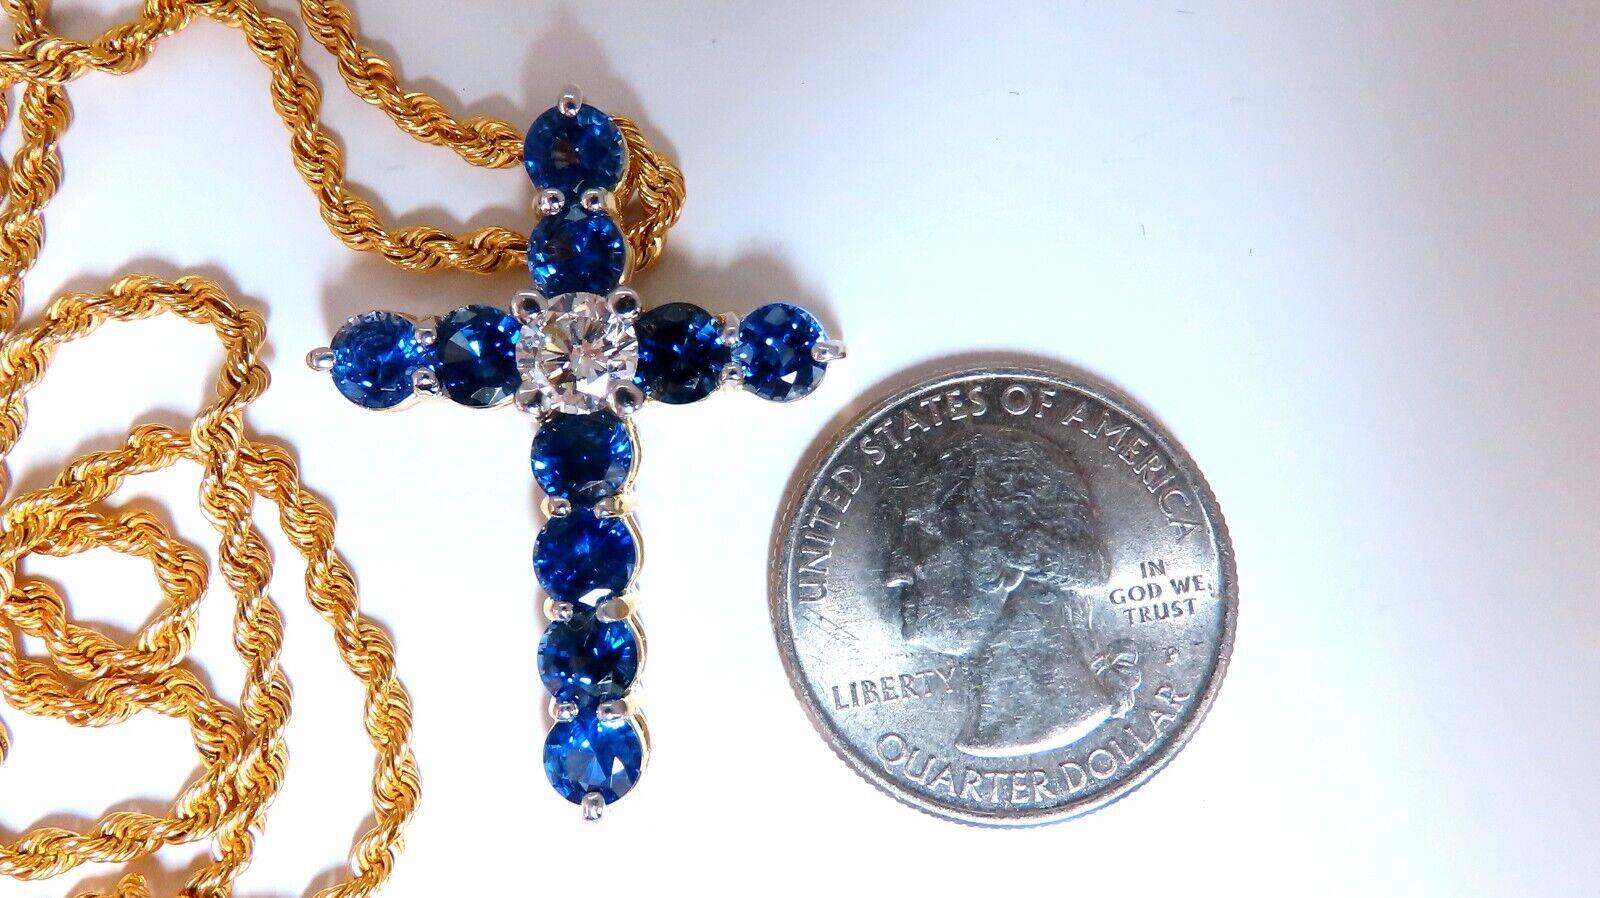 Sapphire Diamond Cross & Chain

GIA Certified: 

1.00ct. Roound Cut Diamond

Report# 5212073220

I-color Vs1 clarity



6.12ct. Natural Blue Sapphires

Rounds, Clear Clarity & Transparent.

Heated.

14kt. yellow gold chain.

Measurement of